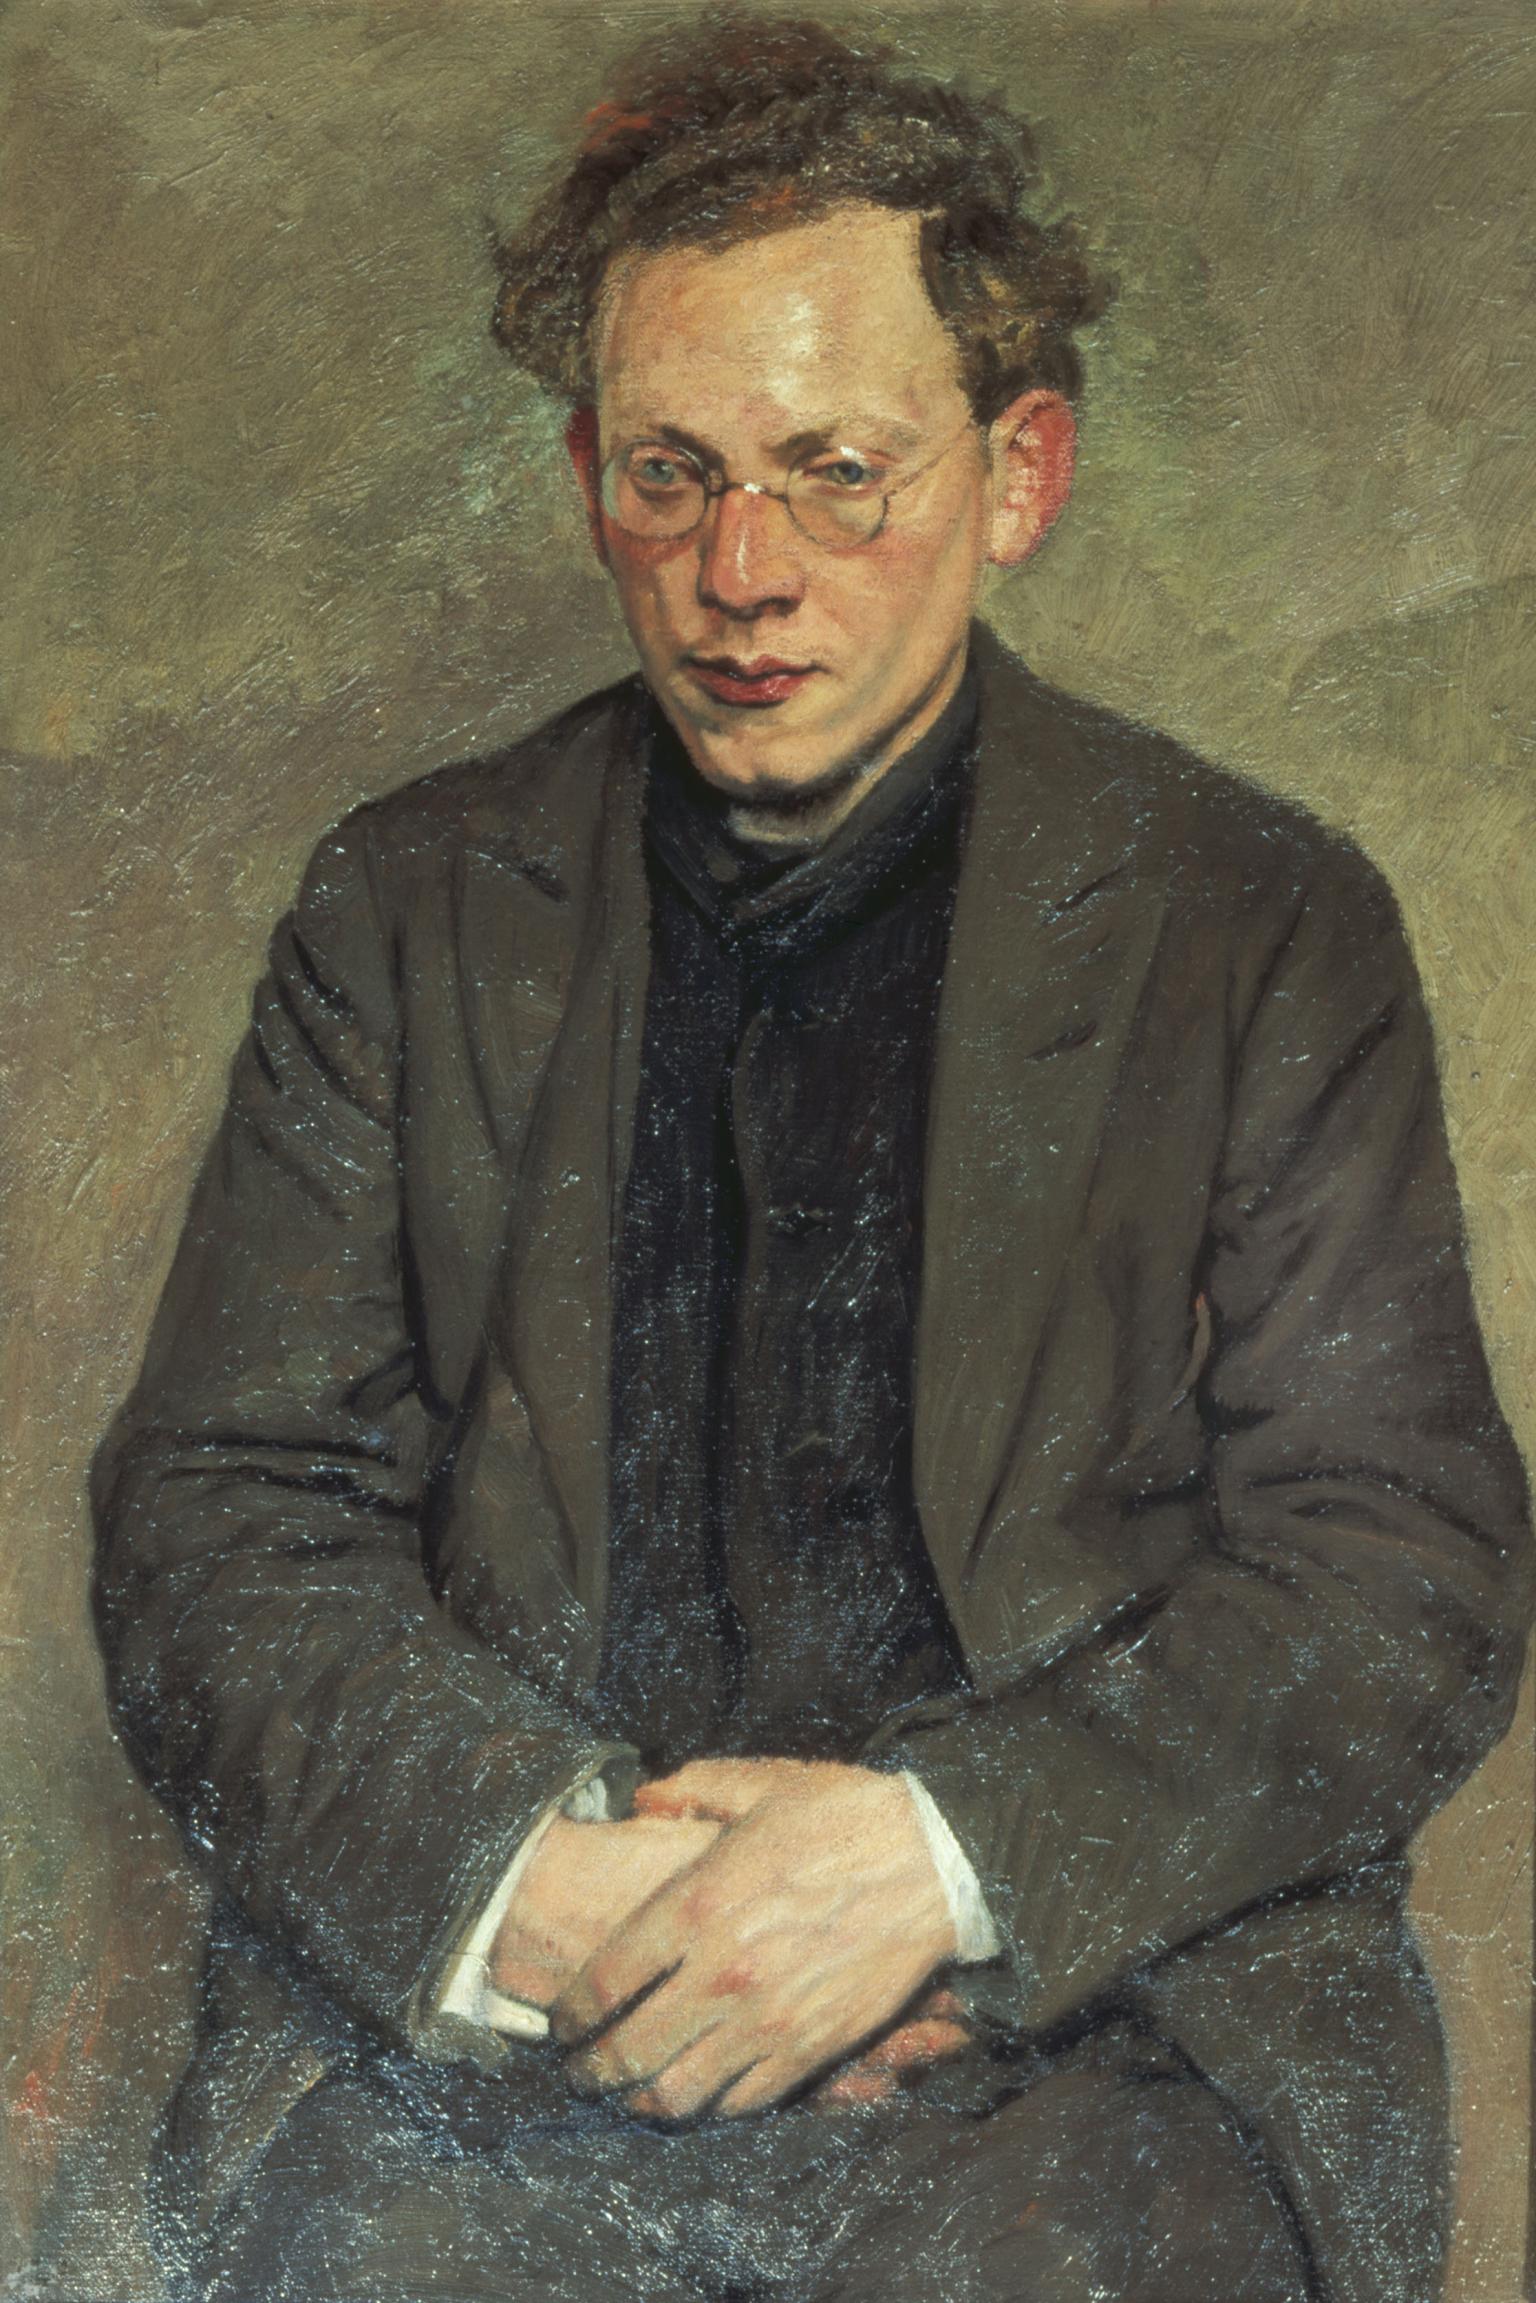 Portrait painting of man wearing glasses and suit jacket, gazing downward with his hands folded in lap.